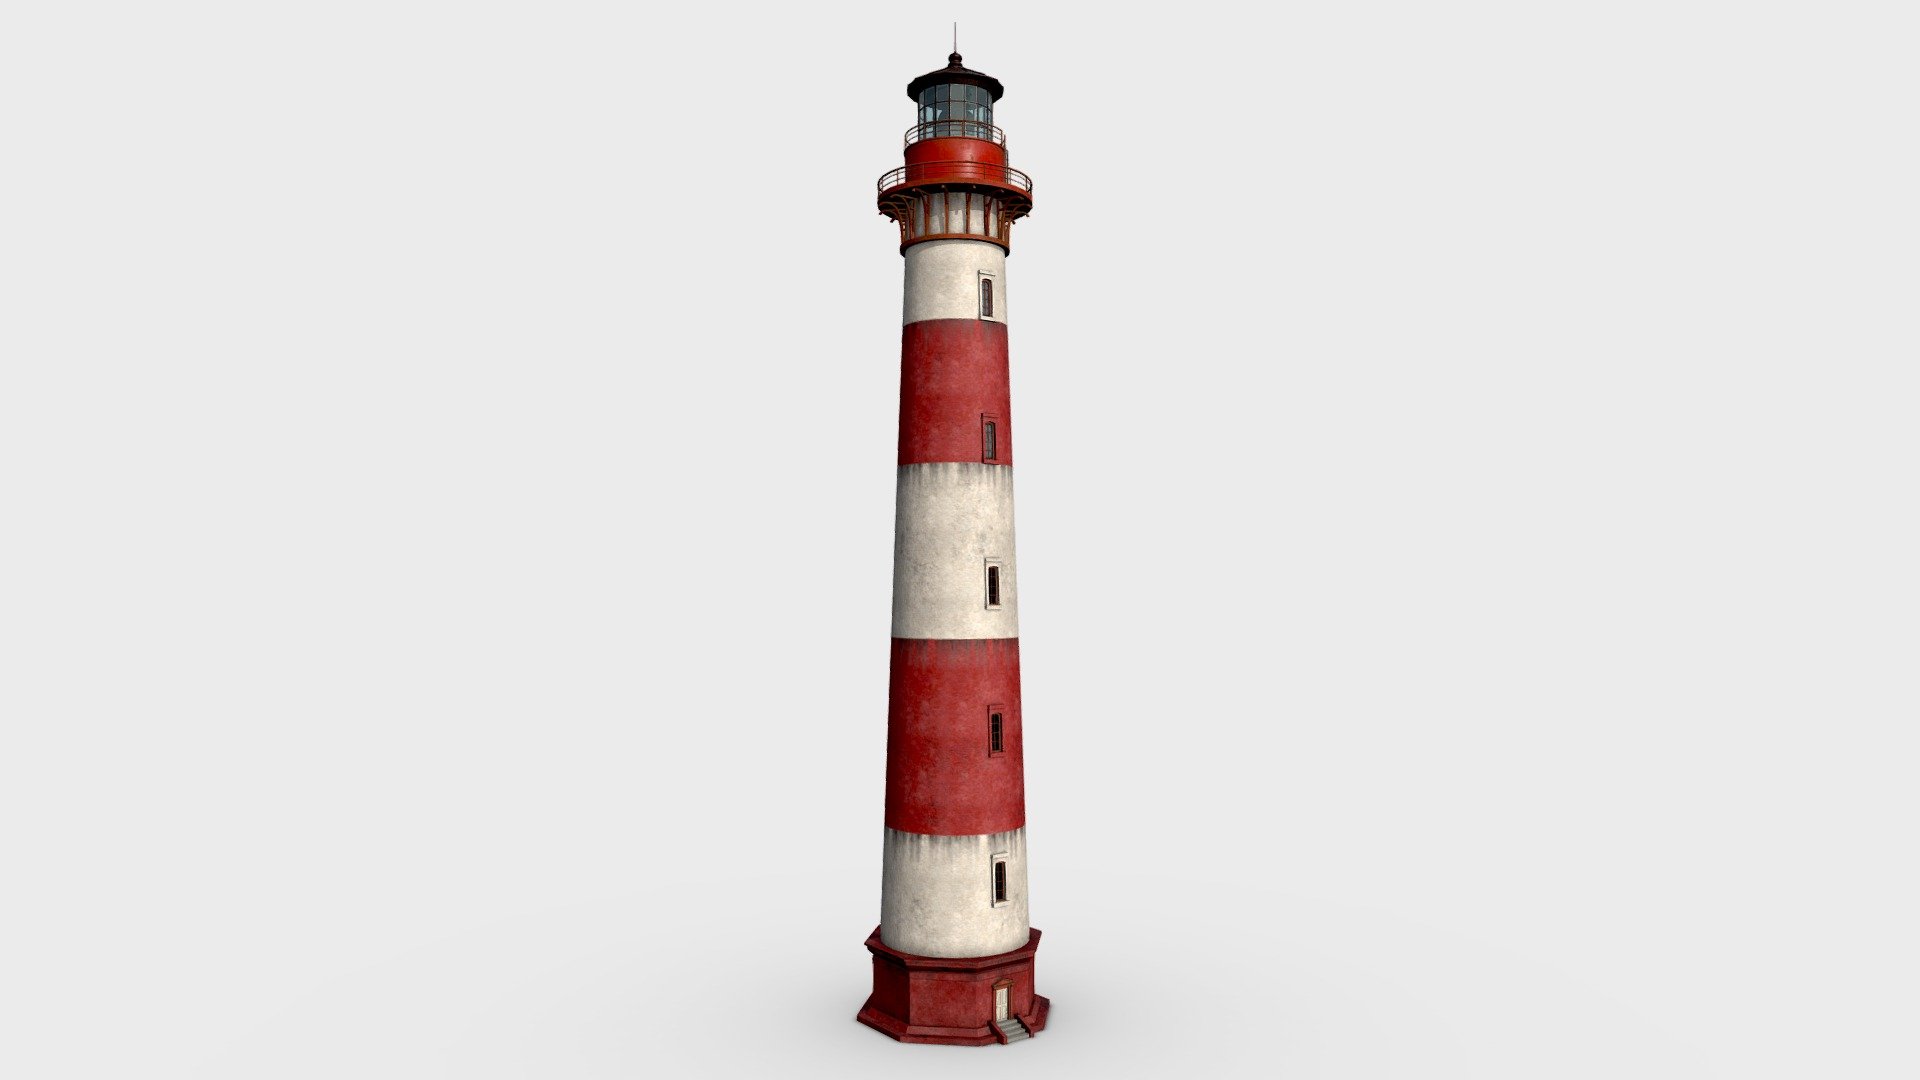 Features:




Low poly

Game ready

Optimized

Separated and nomed parts

Easy to modify

All textures included and materials applied

All formats tested and working

Texture MetalRough and SpecGloss 4096x4096
 - Lighthouse - Buy Royalty Free 3D model by Elvair Lima (@elvair) 3d model